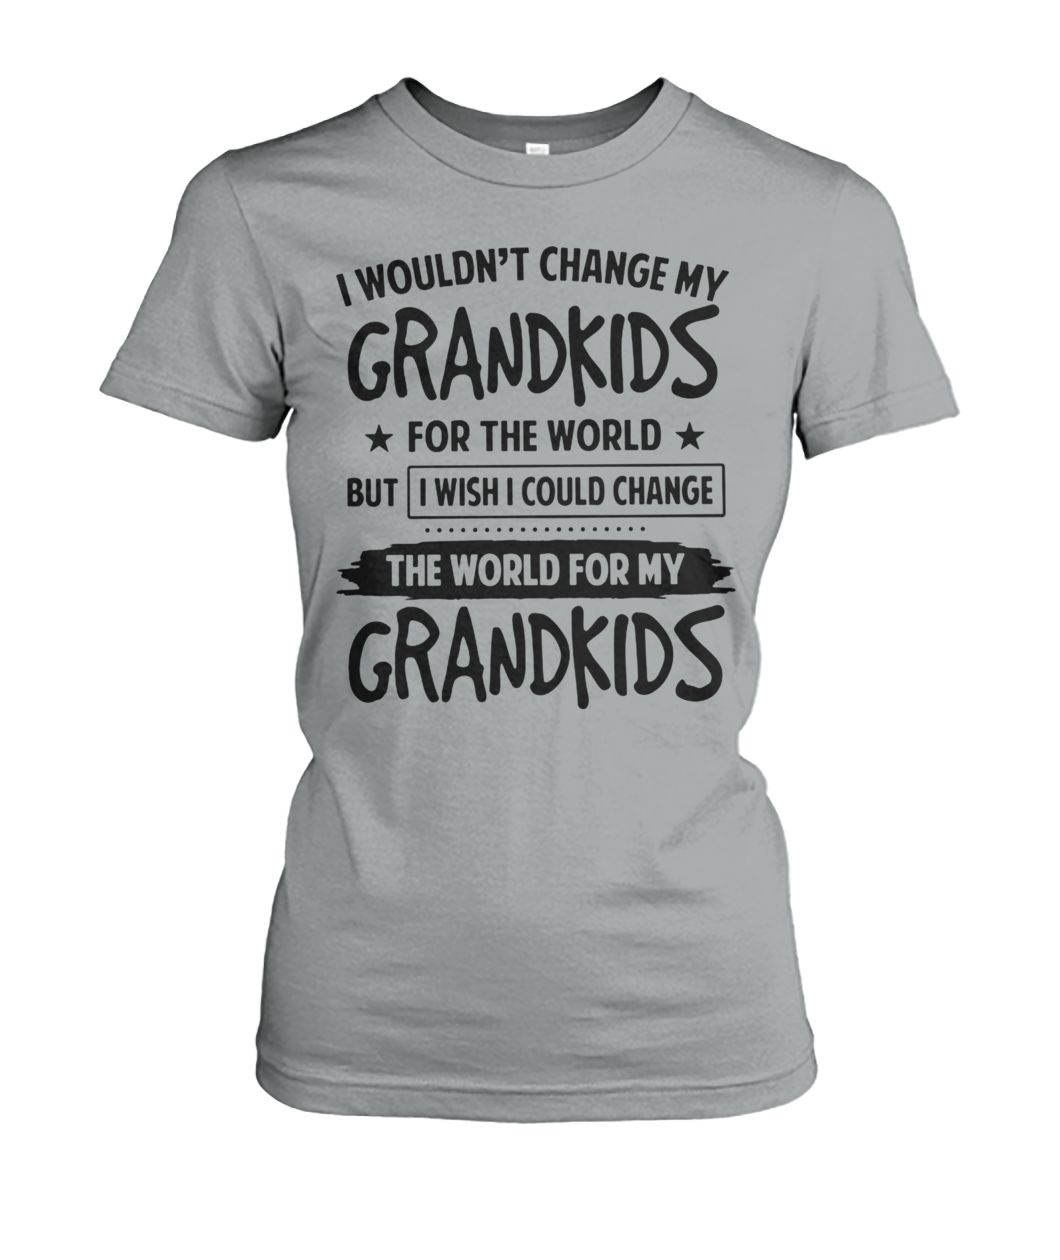 I wouldn’t change my grandkids for the world but I wish I could change the world for my grandkids women's crew tee